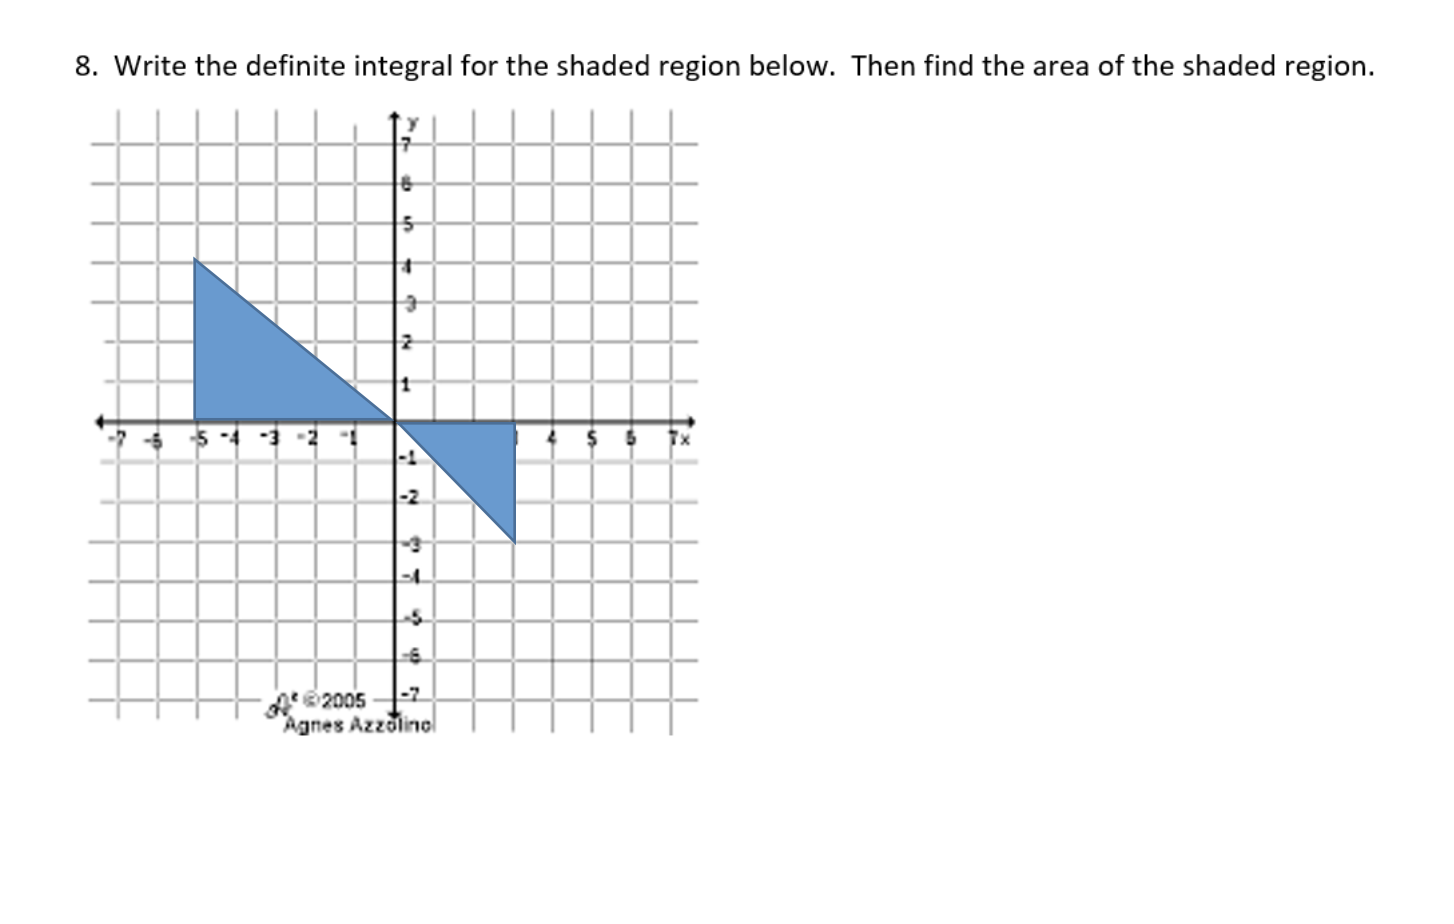 8. Write the definite integral for the shaded region below. Then find the area of the shaded region.
-5 -4
-2
